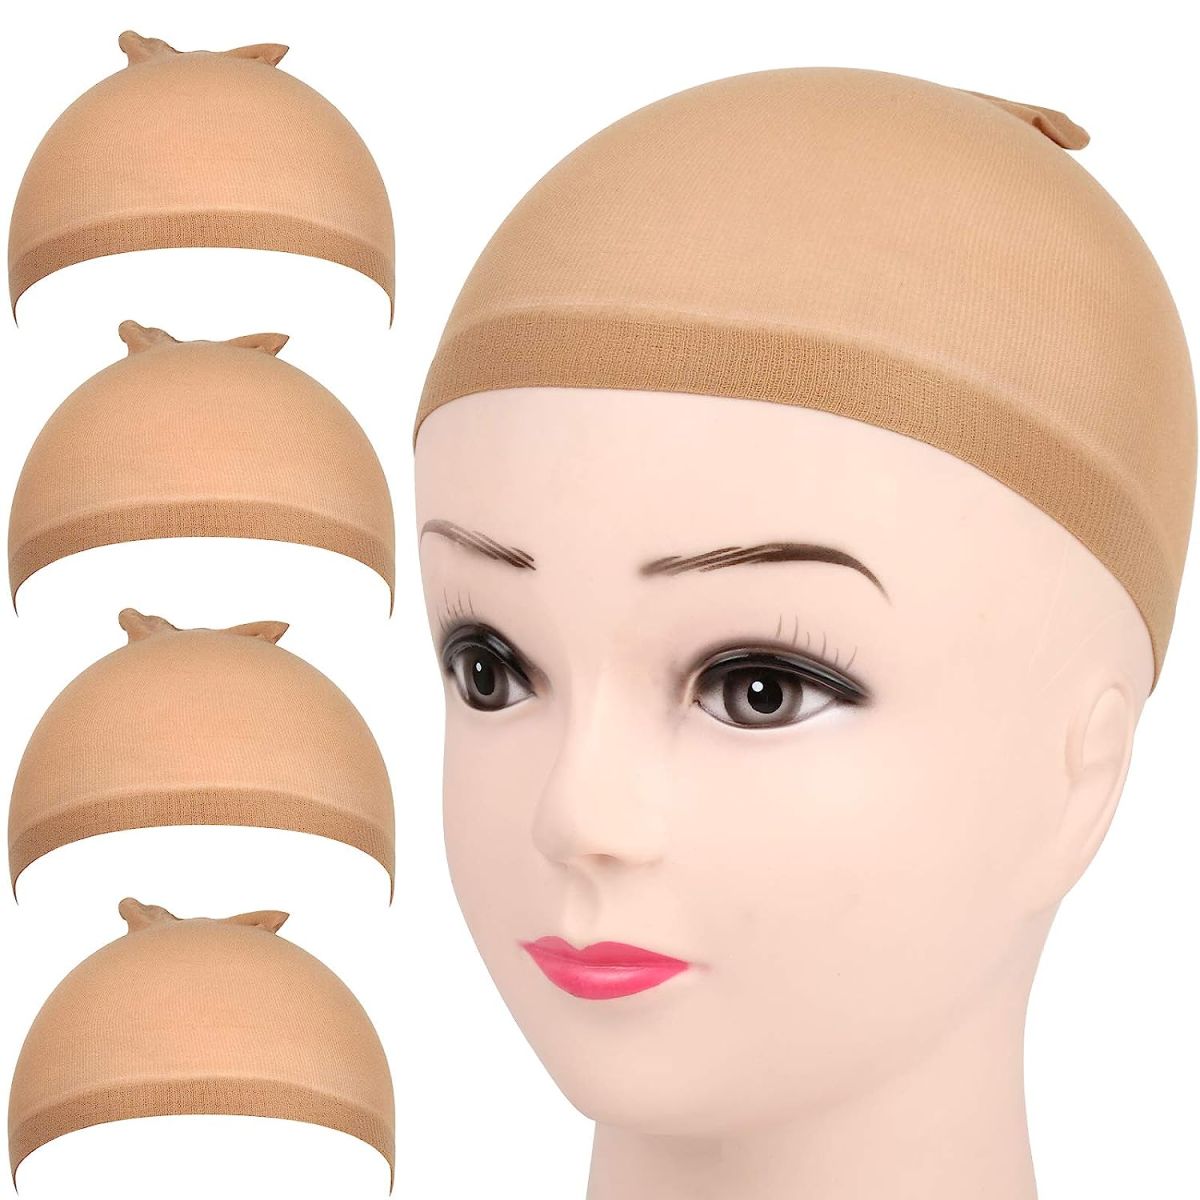 Fandamei 4 pieces Light Brown Stocking Wig Caps Stretchy Nylon Wig Caps for Women